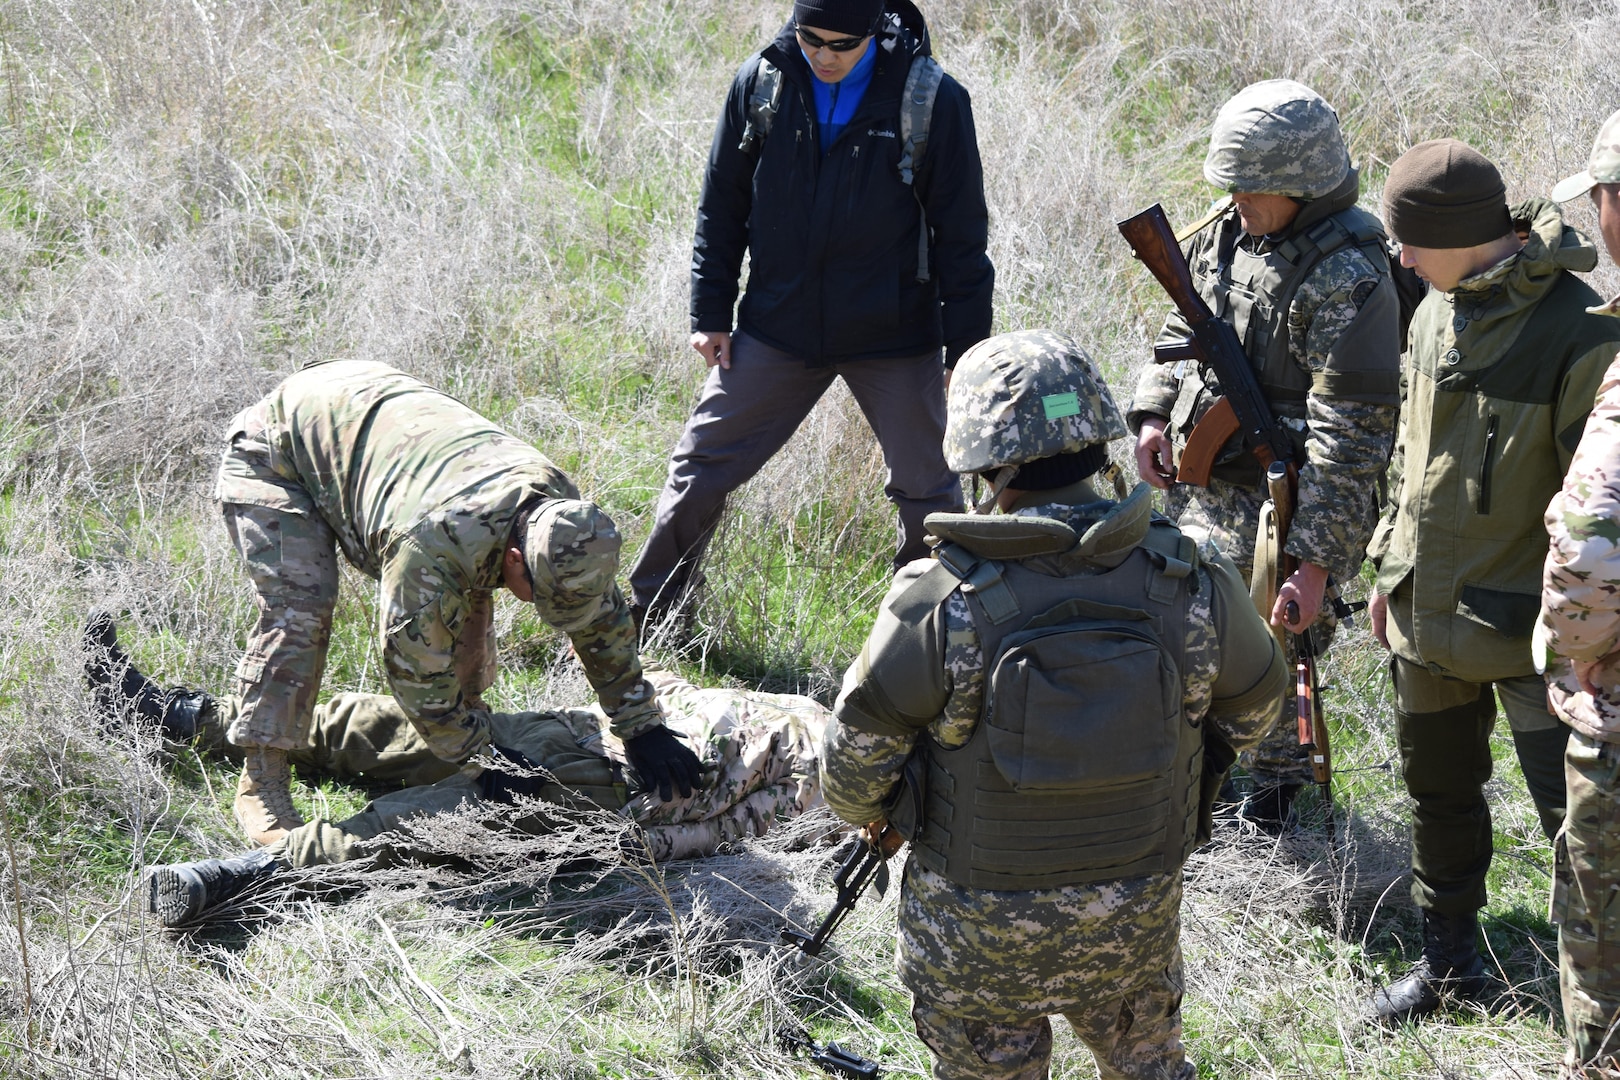 Sgt. 1st Class Javier Martinez, 6th Squadron, 9th Cavalry Regiment, U.S. Army, demonstrates how to search an enemy soldier wounded in action Apr. 9, 2017, during the practical exercise scenarios for Steppe Eagle Koktem at Illisky Training Center, Kazakhstan.